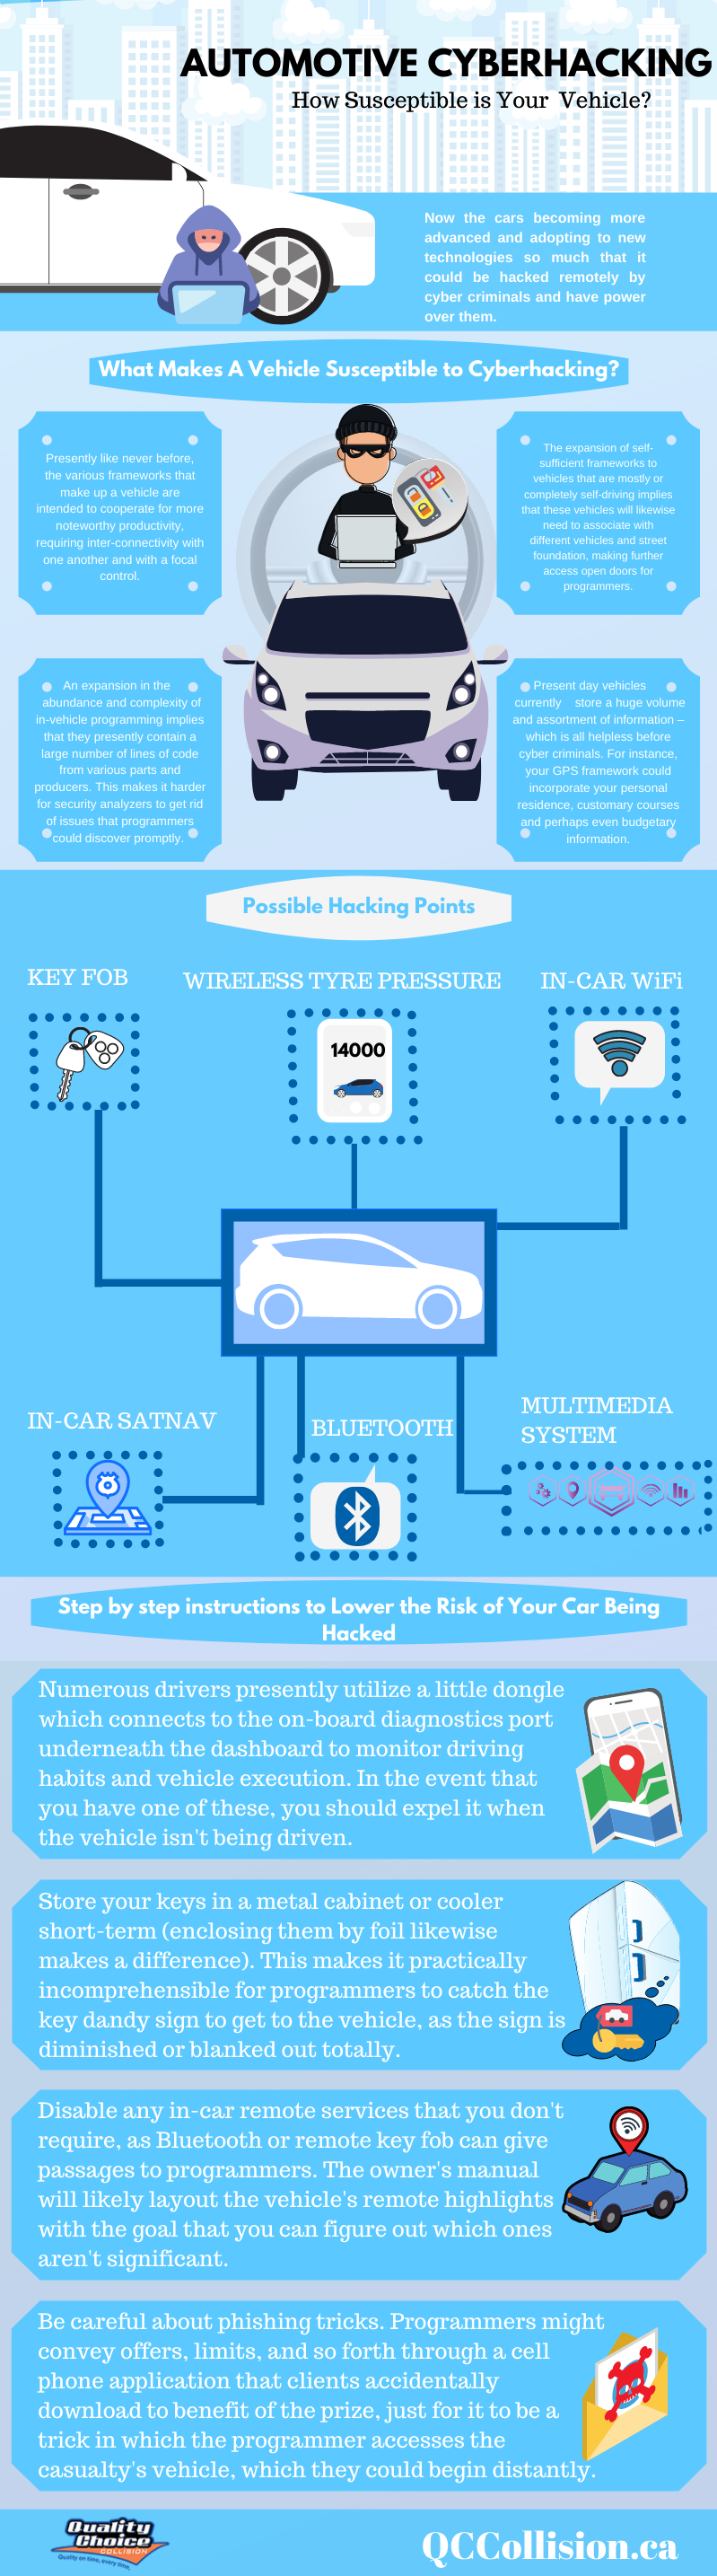 AUTOMOTIVE HACKING, Industry Today